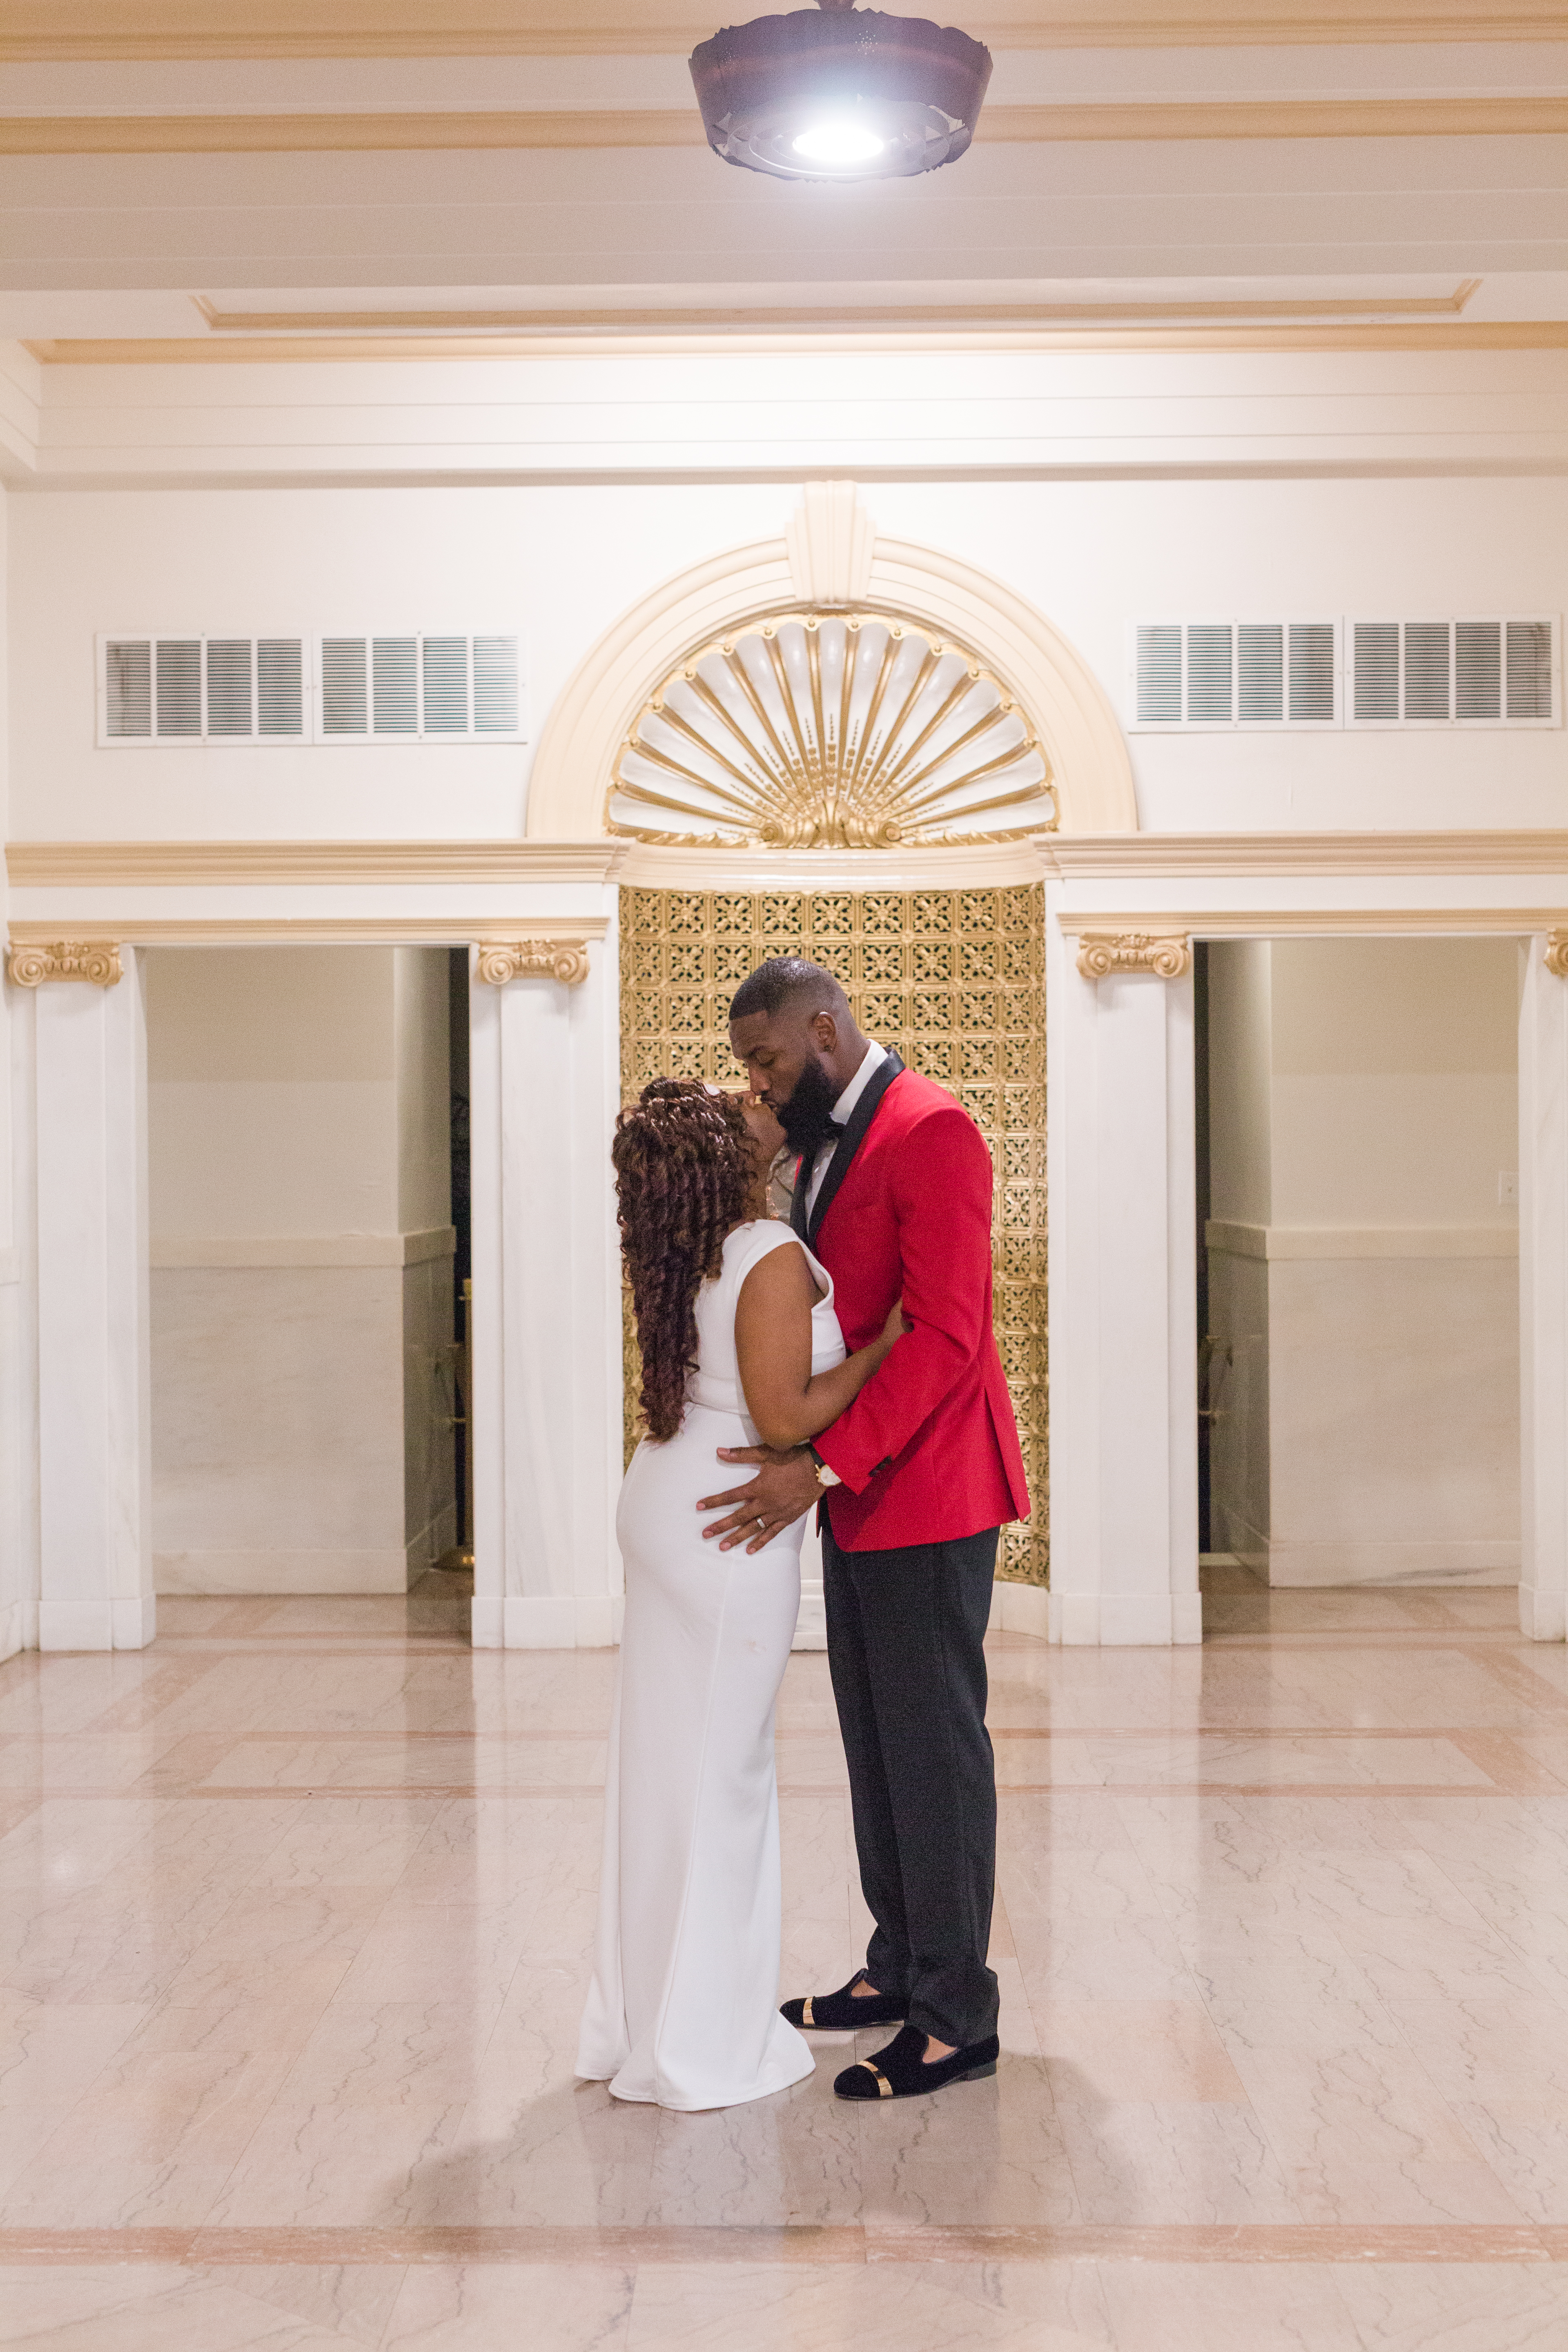 Arkansas Summer wedding photography at the Albert Pike Masonic Temple by Nancy Cole